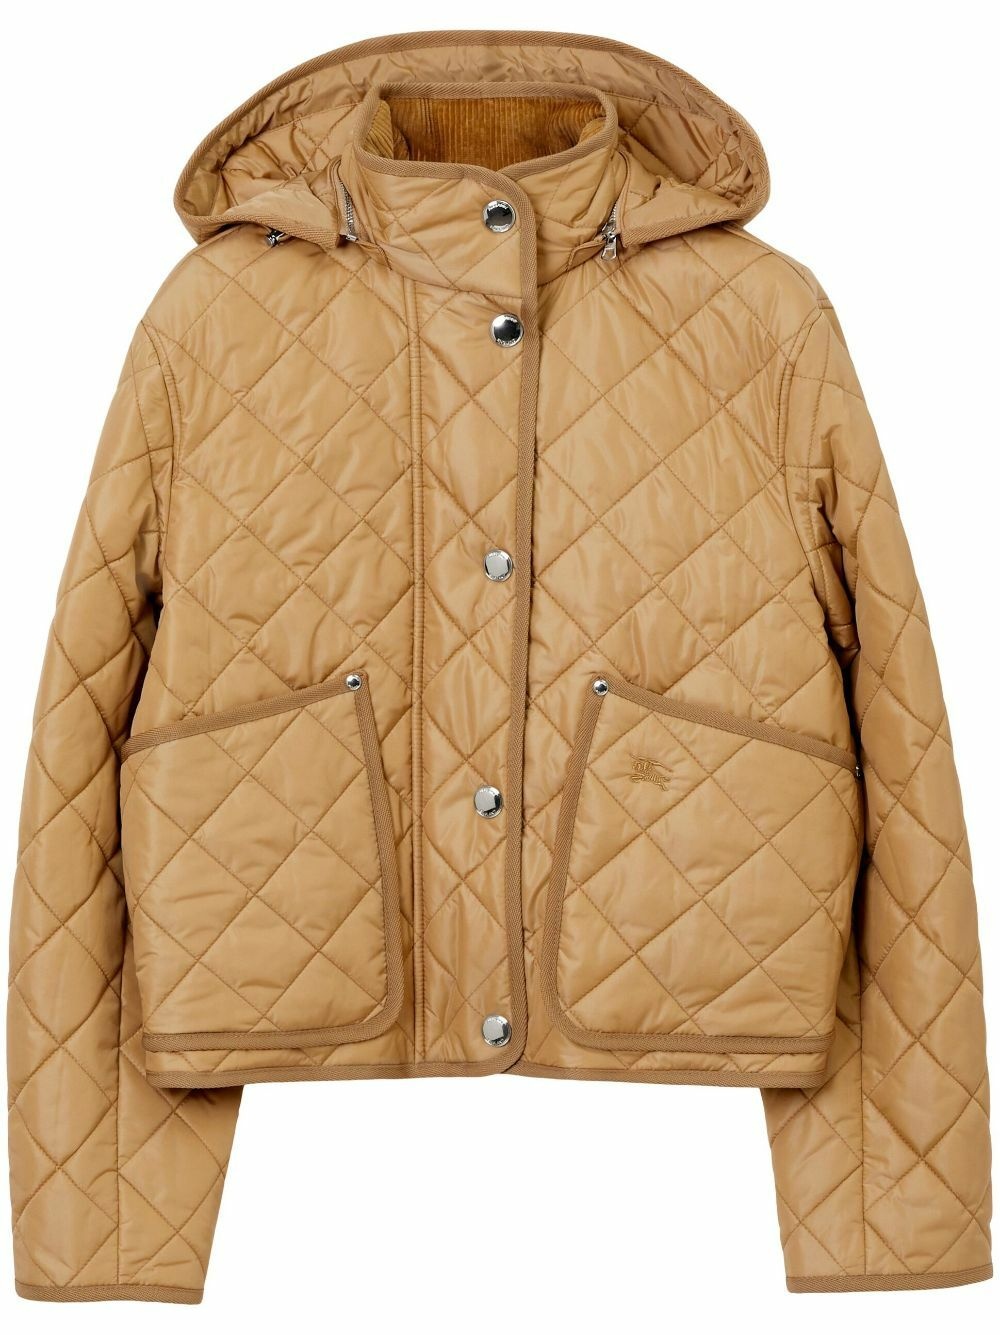 BURBERRY - Recycled Nylon Quilted Jacket Burberry